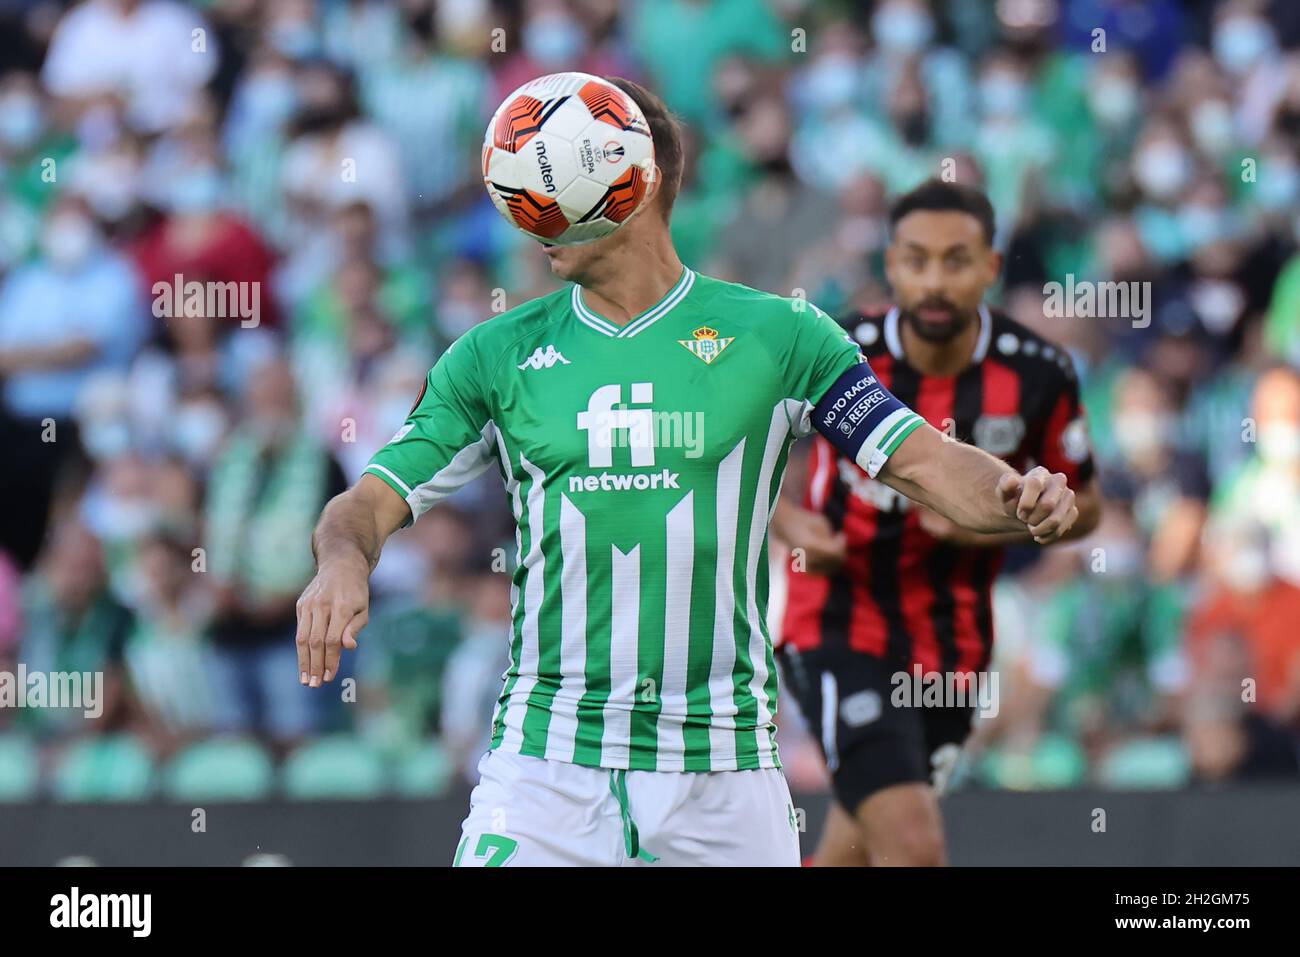 Diego Lainez of Real Betis during the UEFA Europa League match between Real  Betis and Ferencvaros TC played at Benito Villamarin Stadium on November  25, 2021 in Sevilla, Spain. (Photo by Antonio